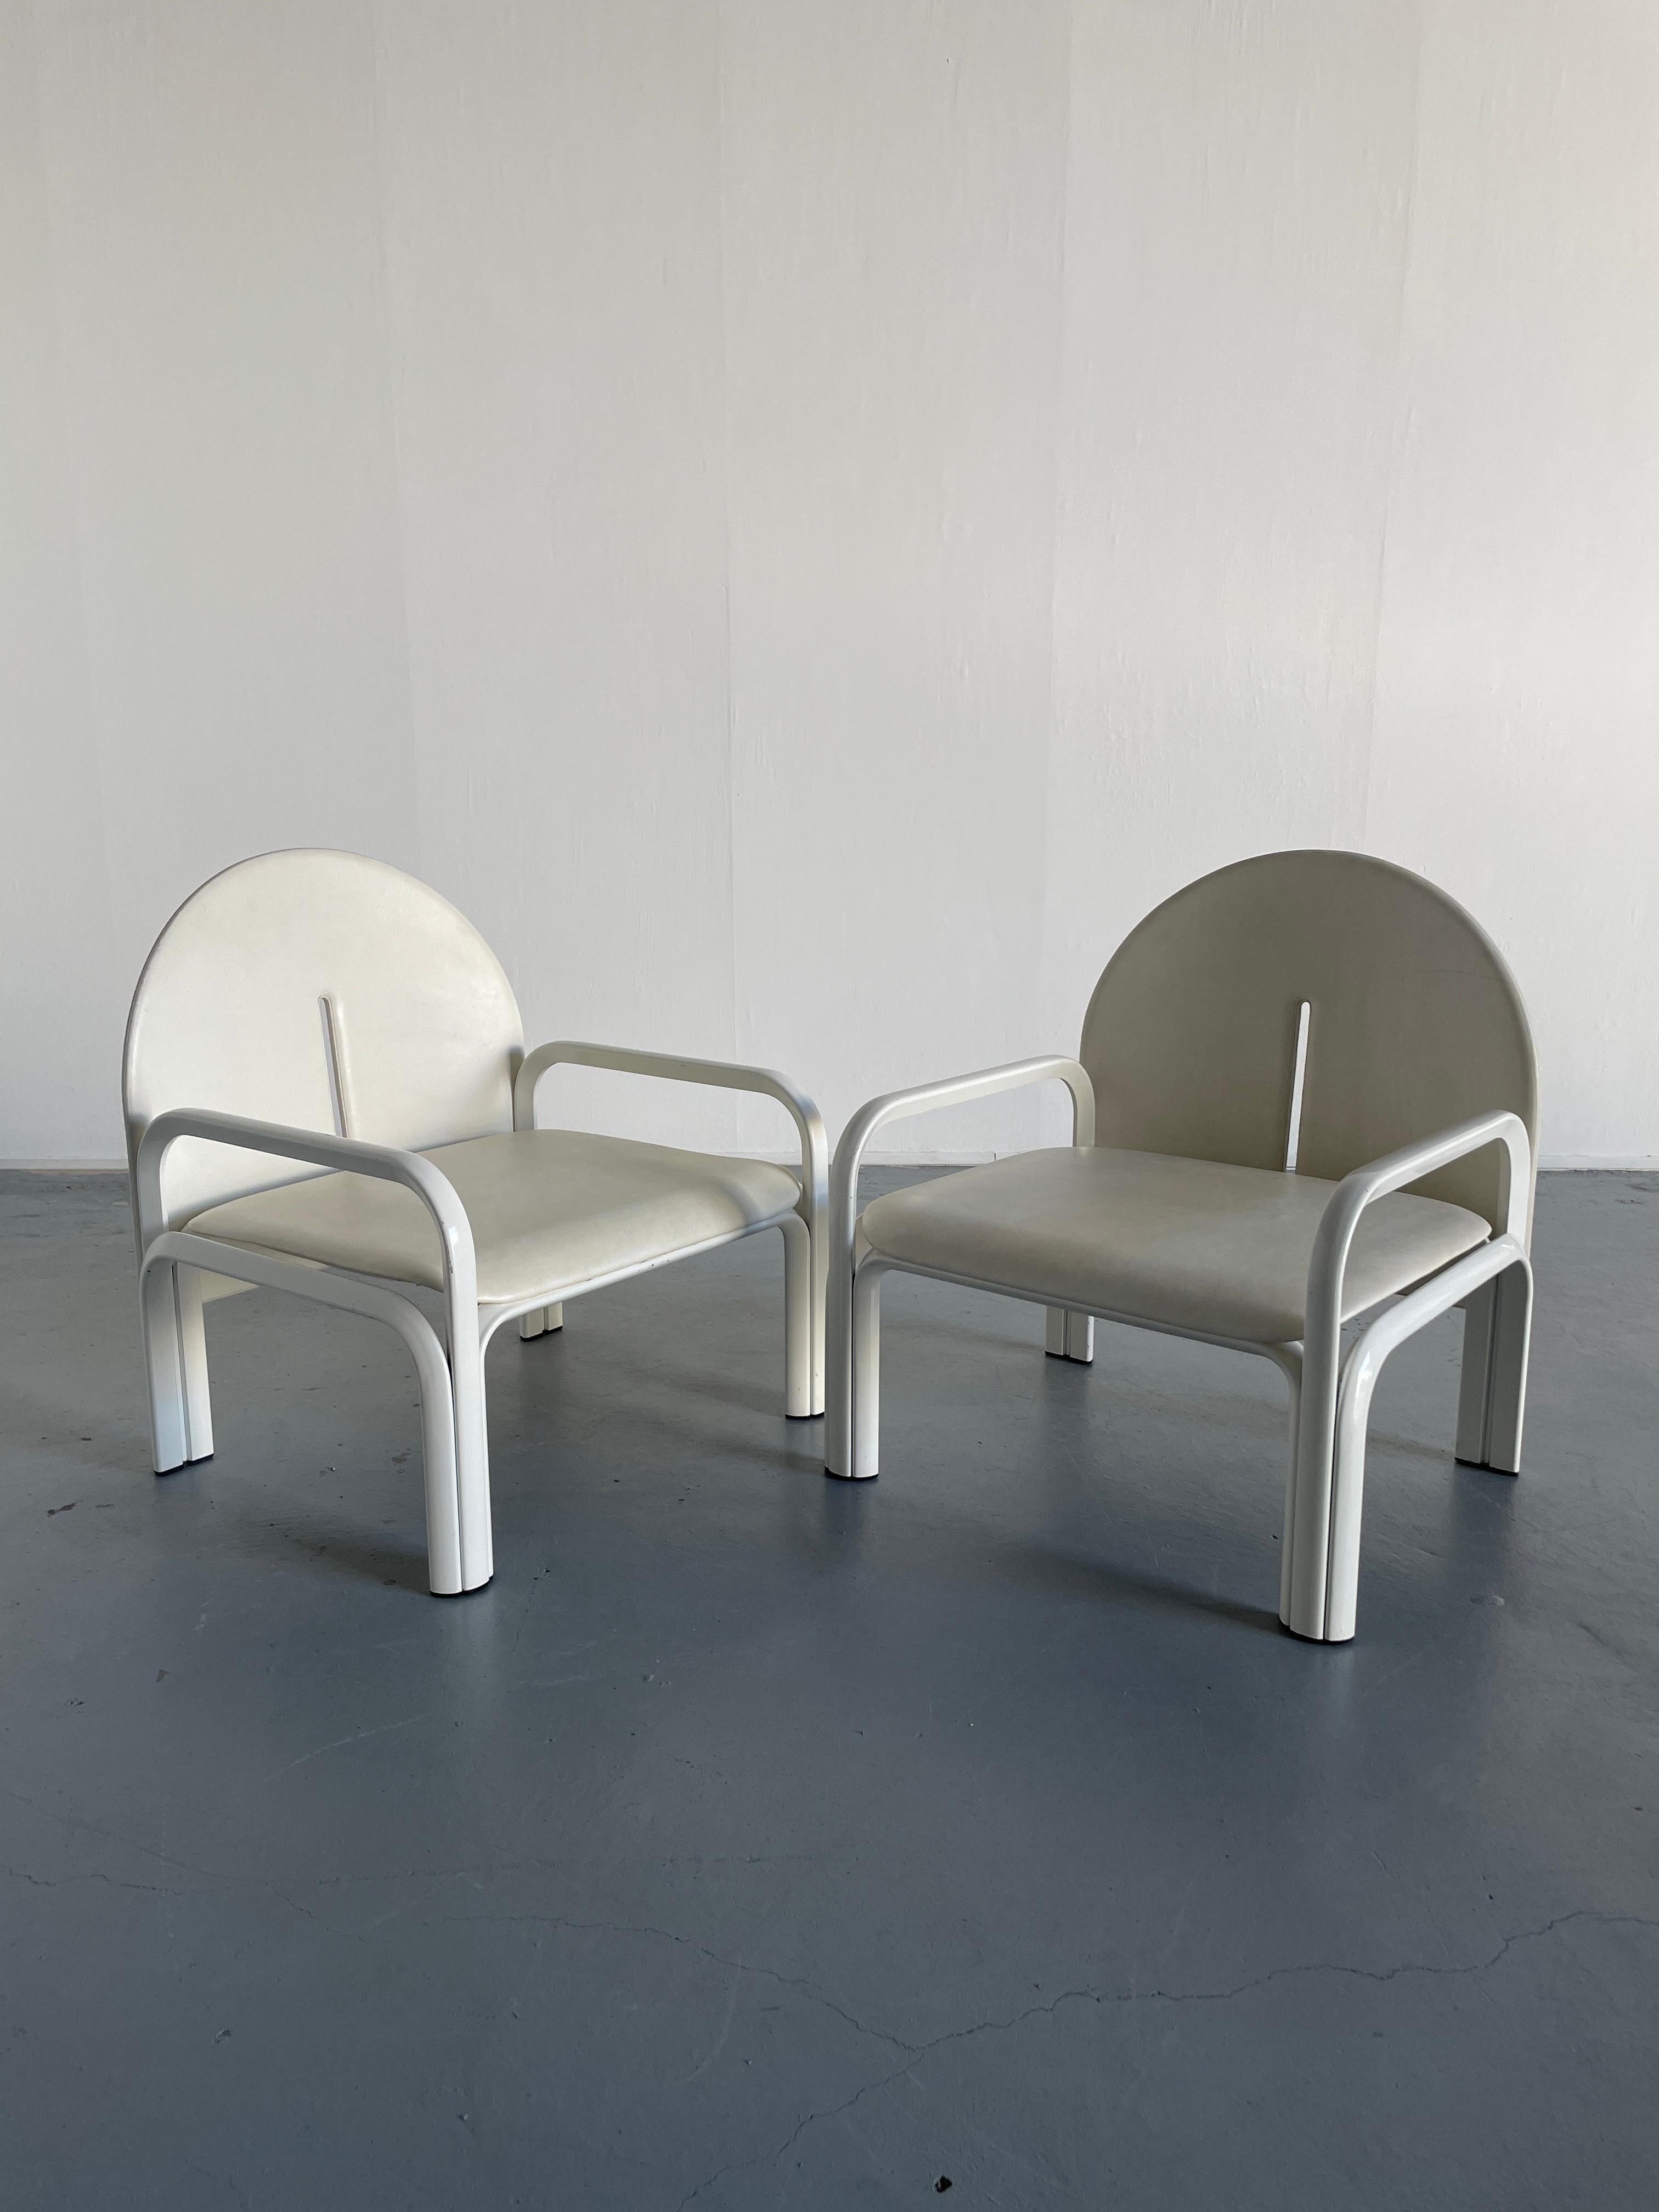 Exceptionally rare and collectible, armchairs, model '54L' designed by Gae Aulenti for Knoll International. Late 1970s production, in a even more rare, all white edition.

Iconic design of the 20th century.

Metal structure and leather upholstered